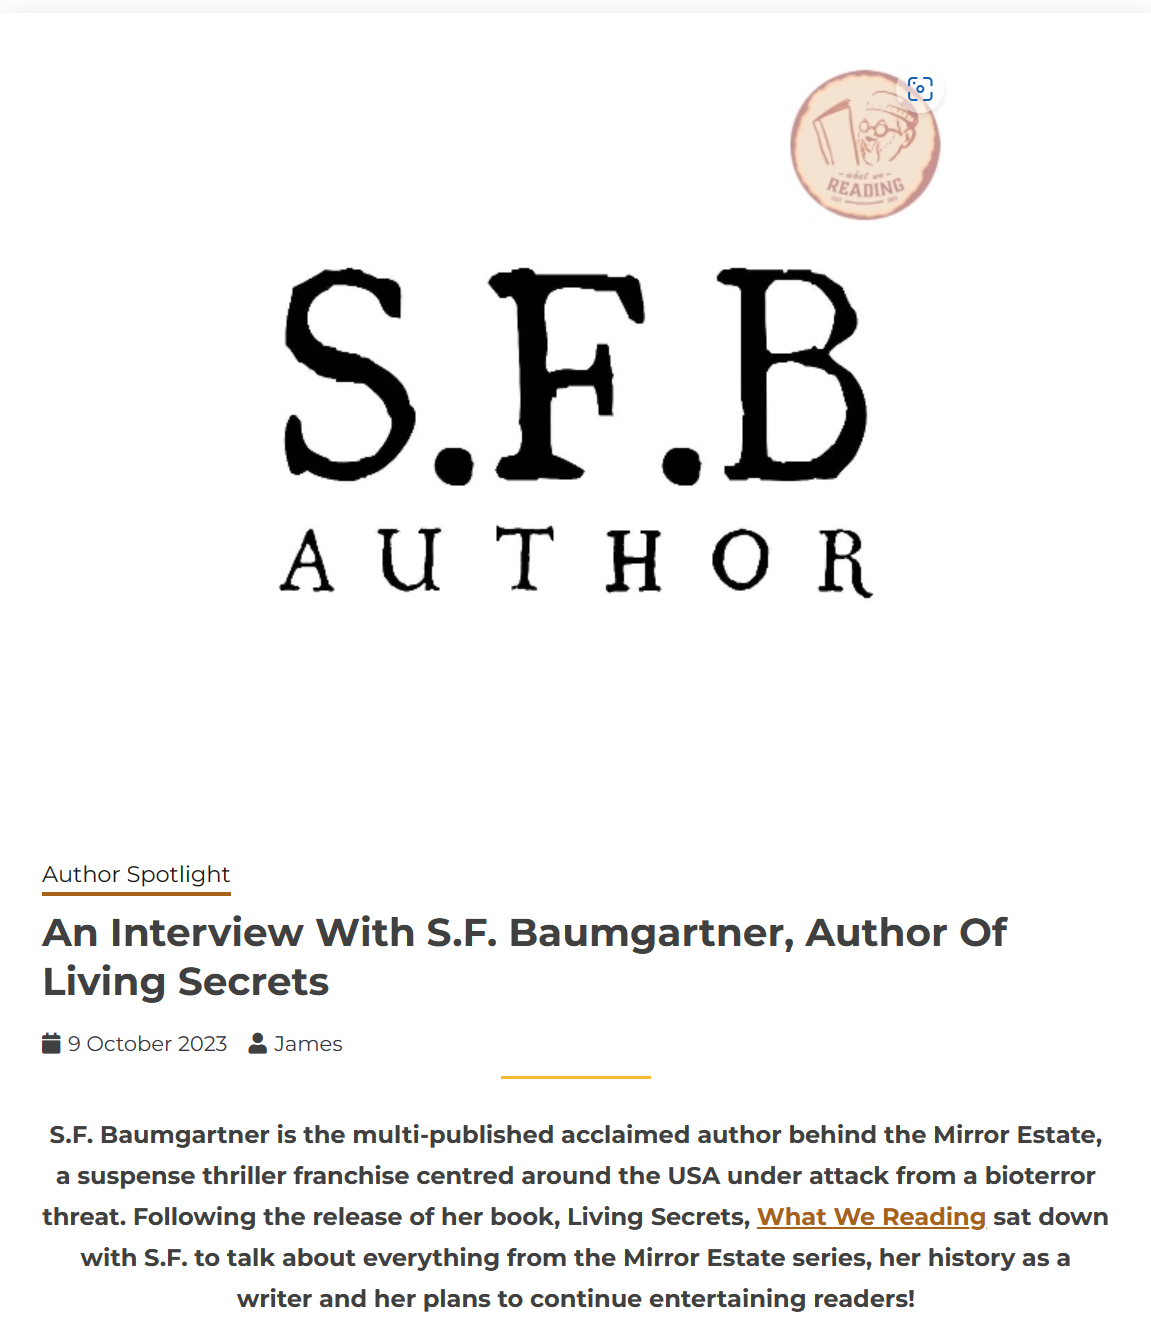 an interview with S.F. Baumgartner